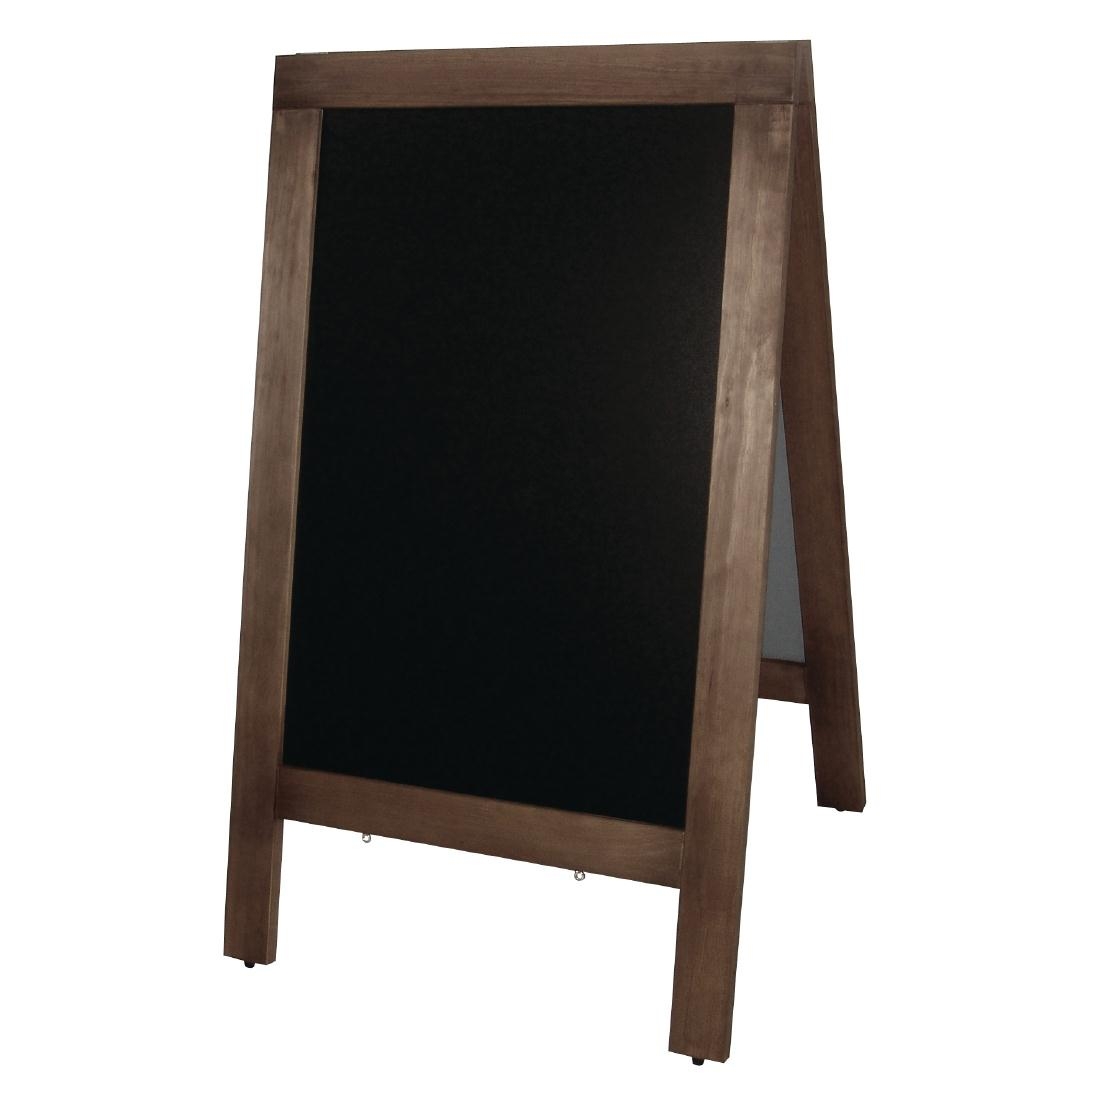 Olympia Pavement Board 1200 x 700mm Wood Framed